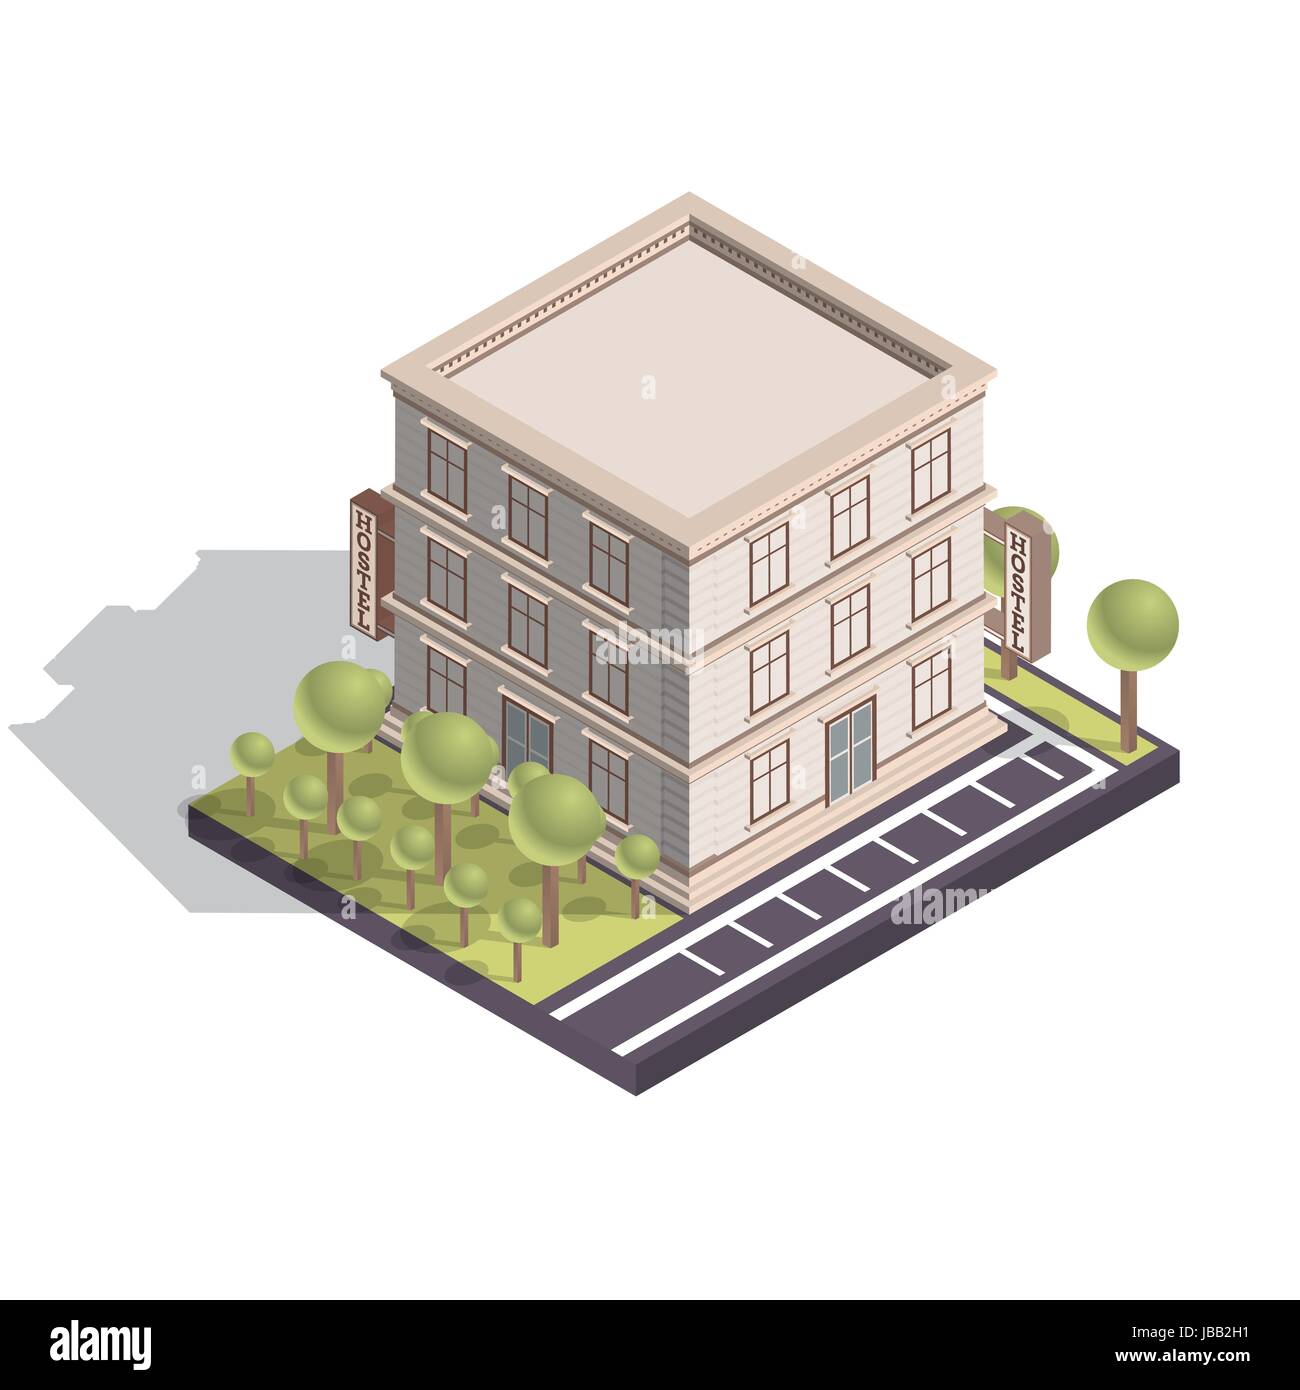 Isometric Hotel or Hostel Building Isolated on White Background. Vector Illustration. Stock Vector